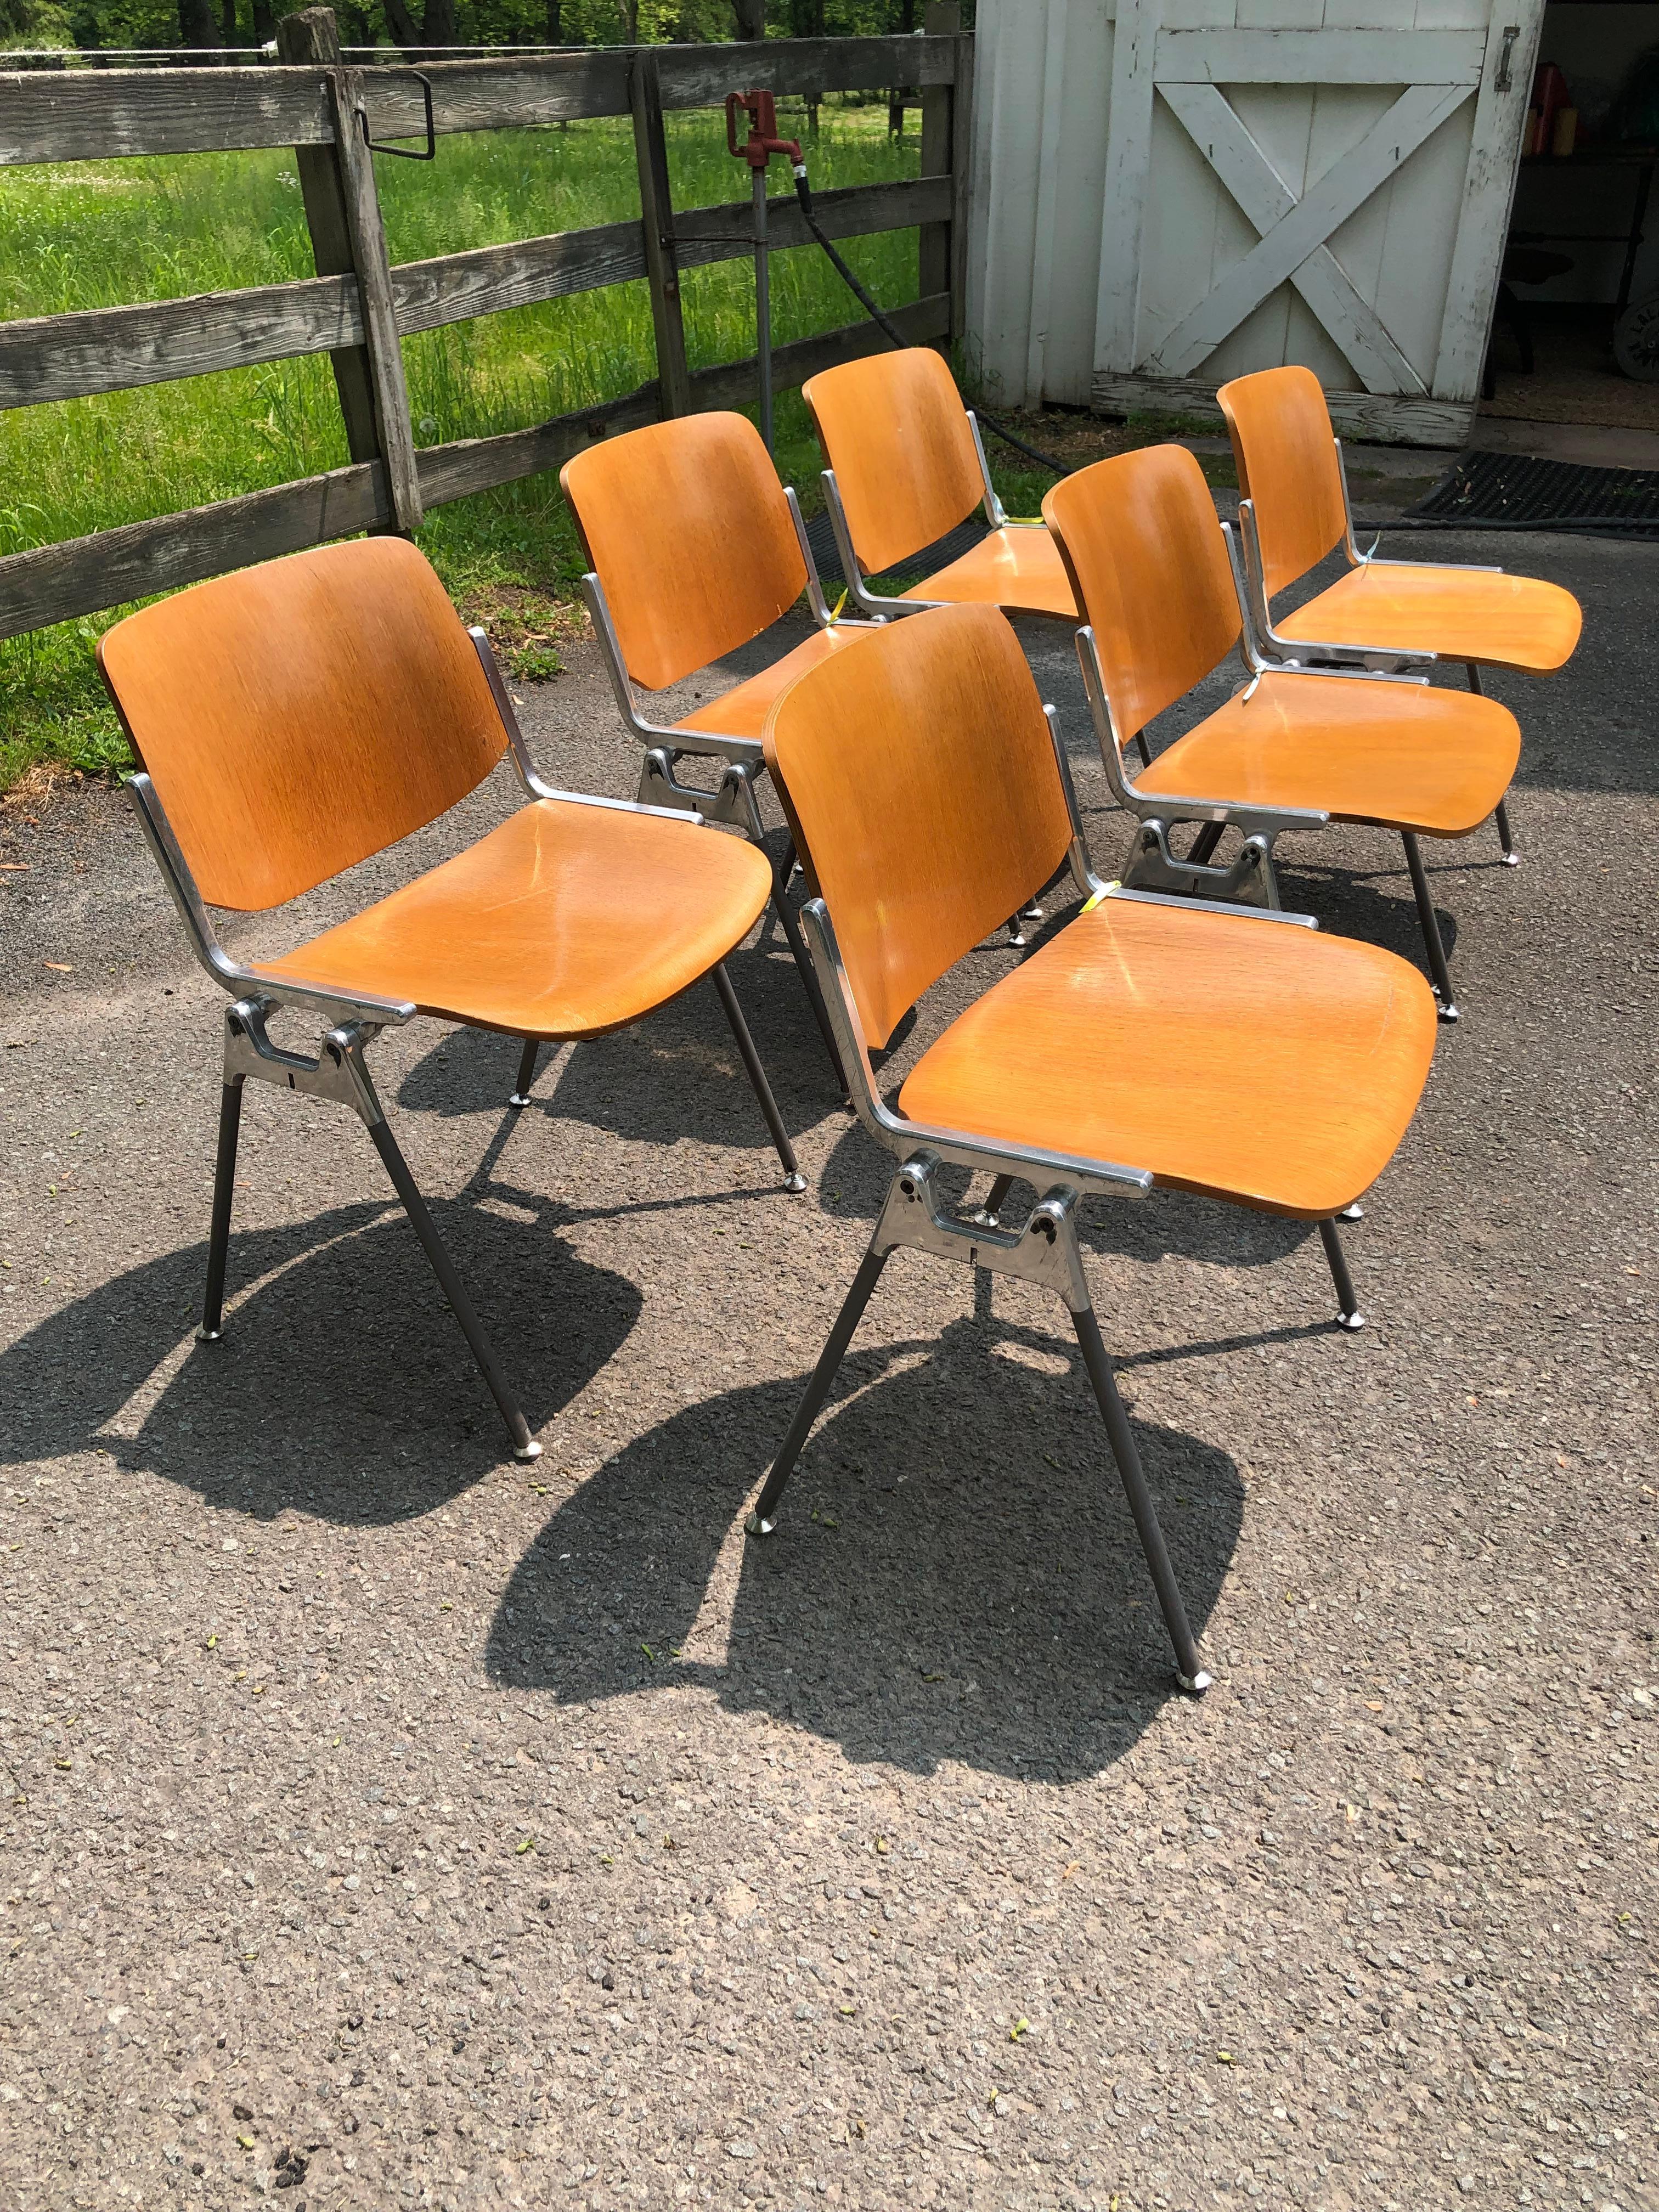  Set of 6 Mid-Century Modern Plywood & Steel Schoolhouse Dining Chairs 1